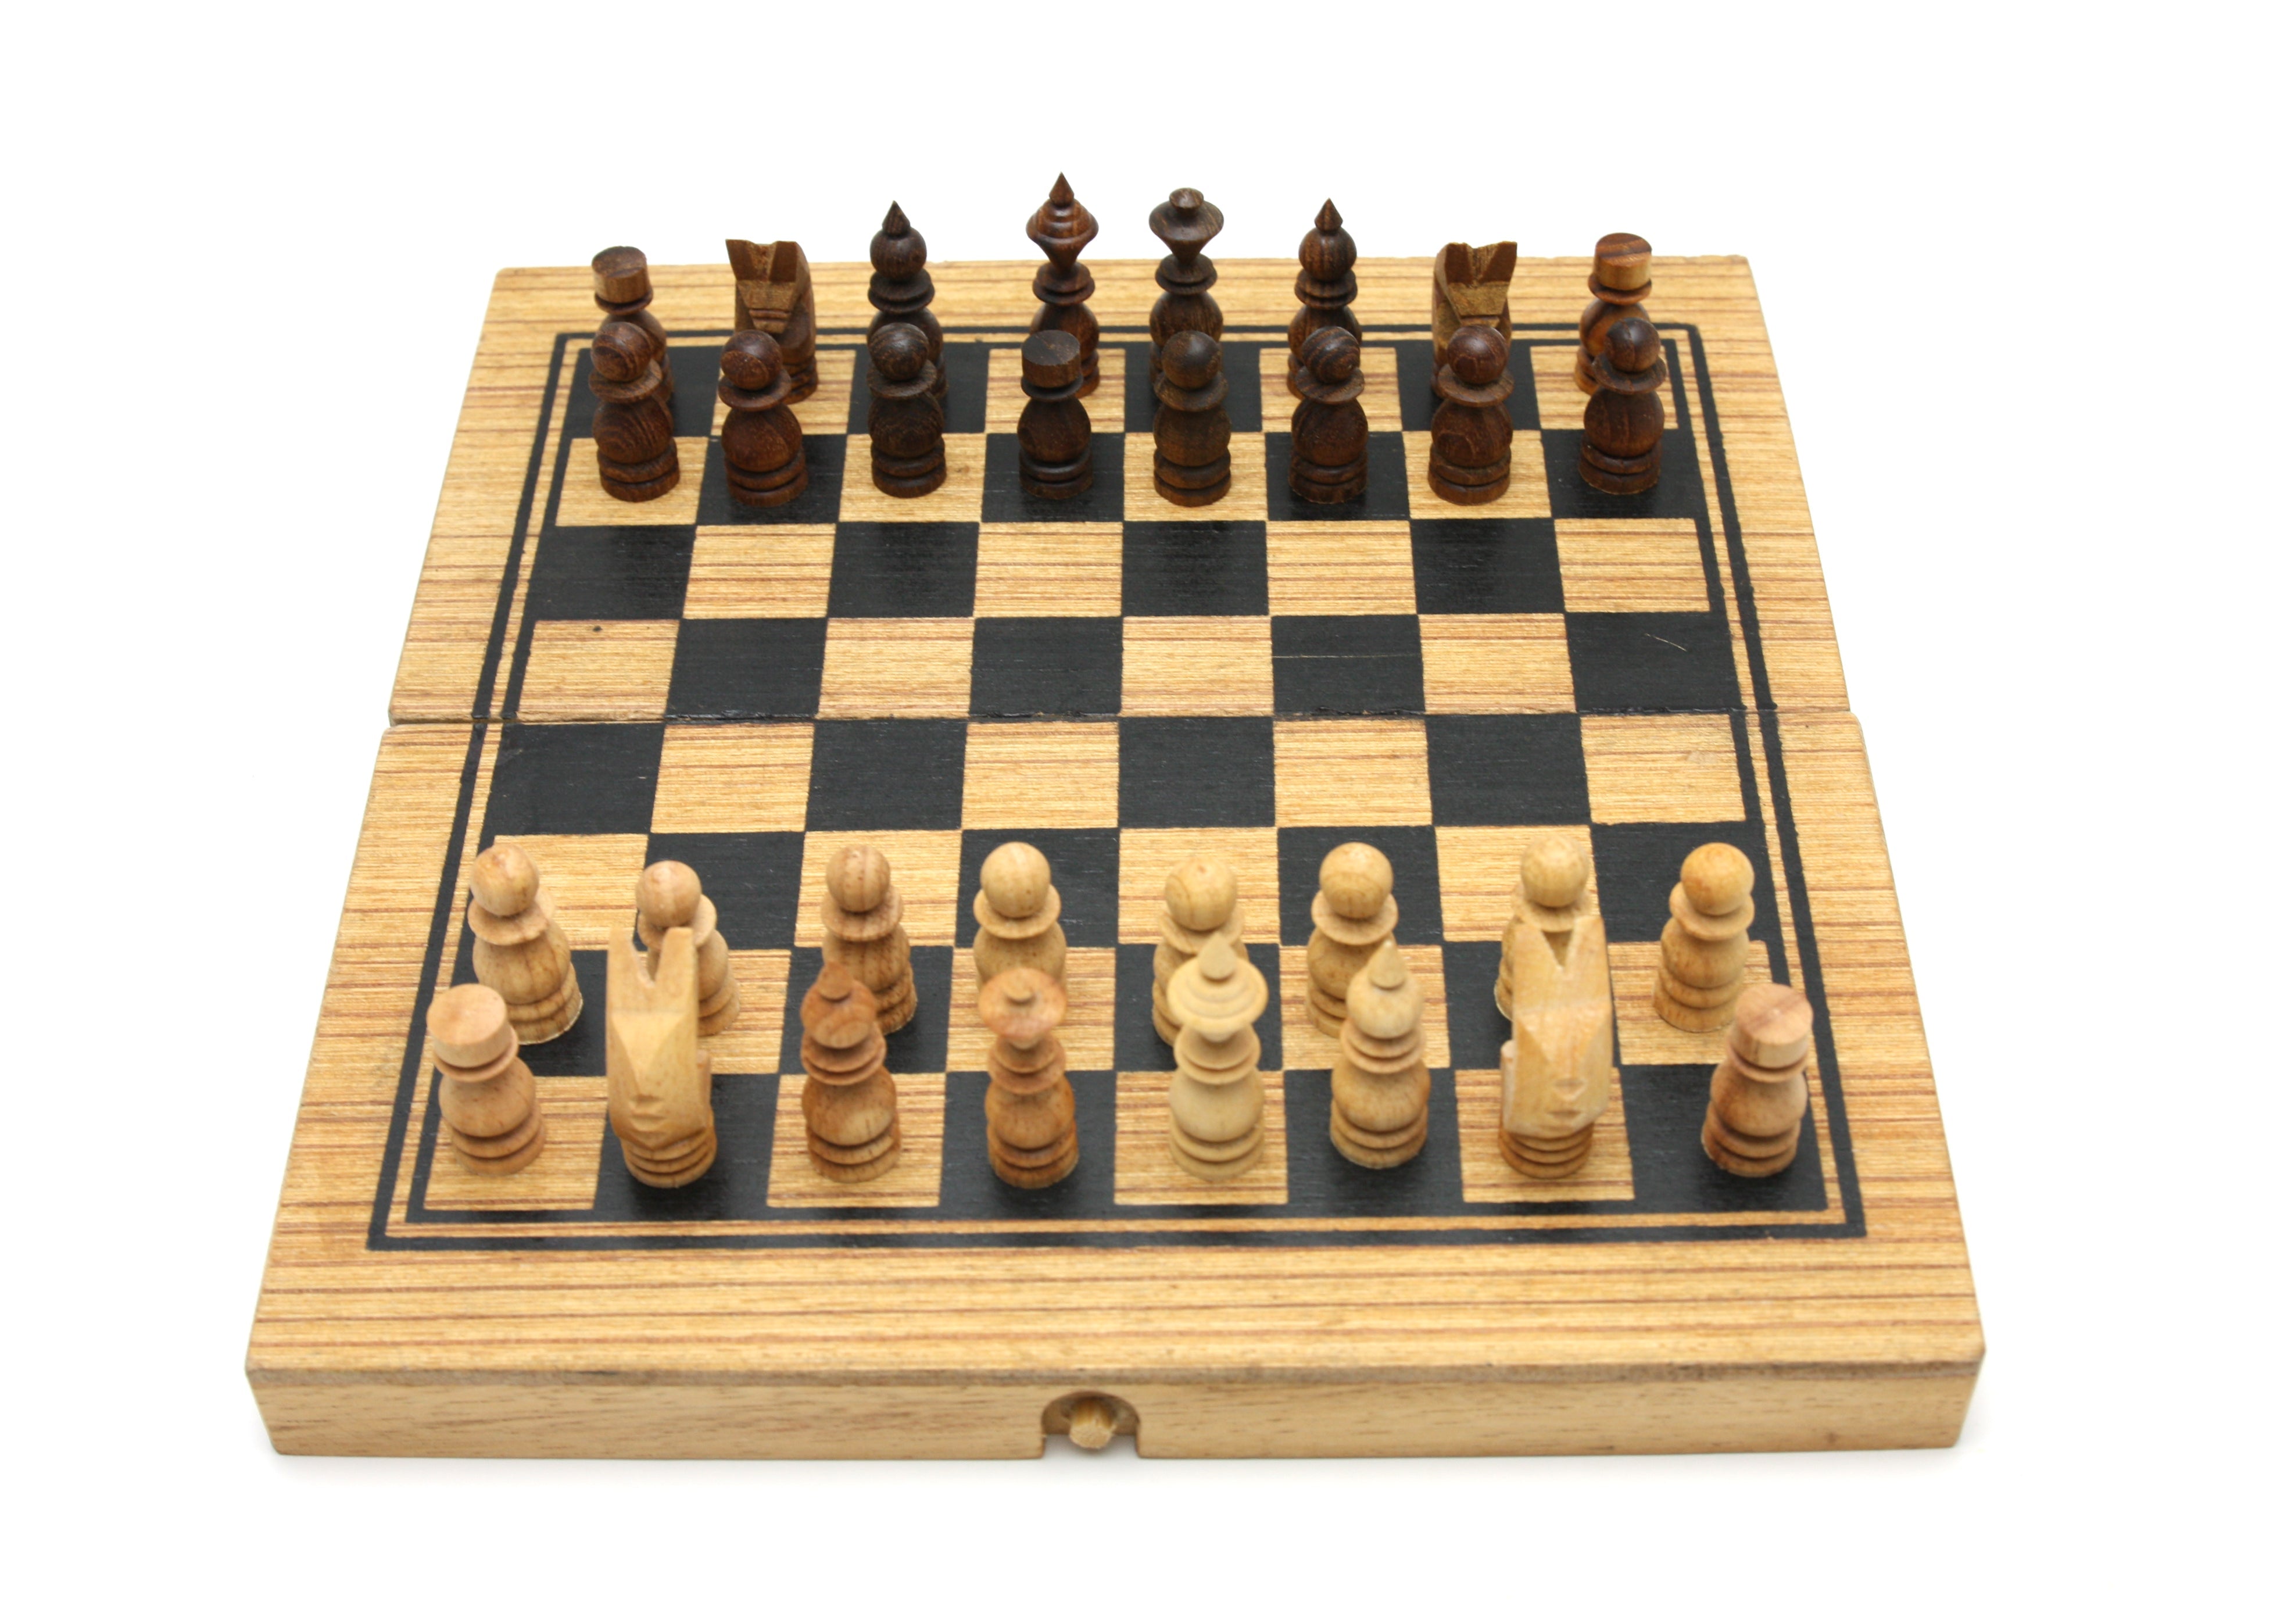 Chess for Three, Board Game